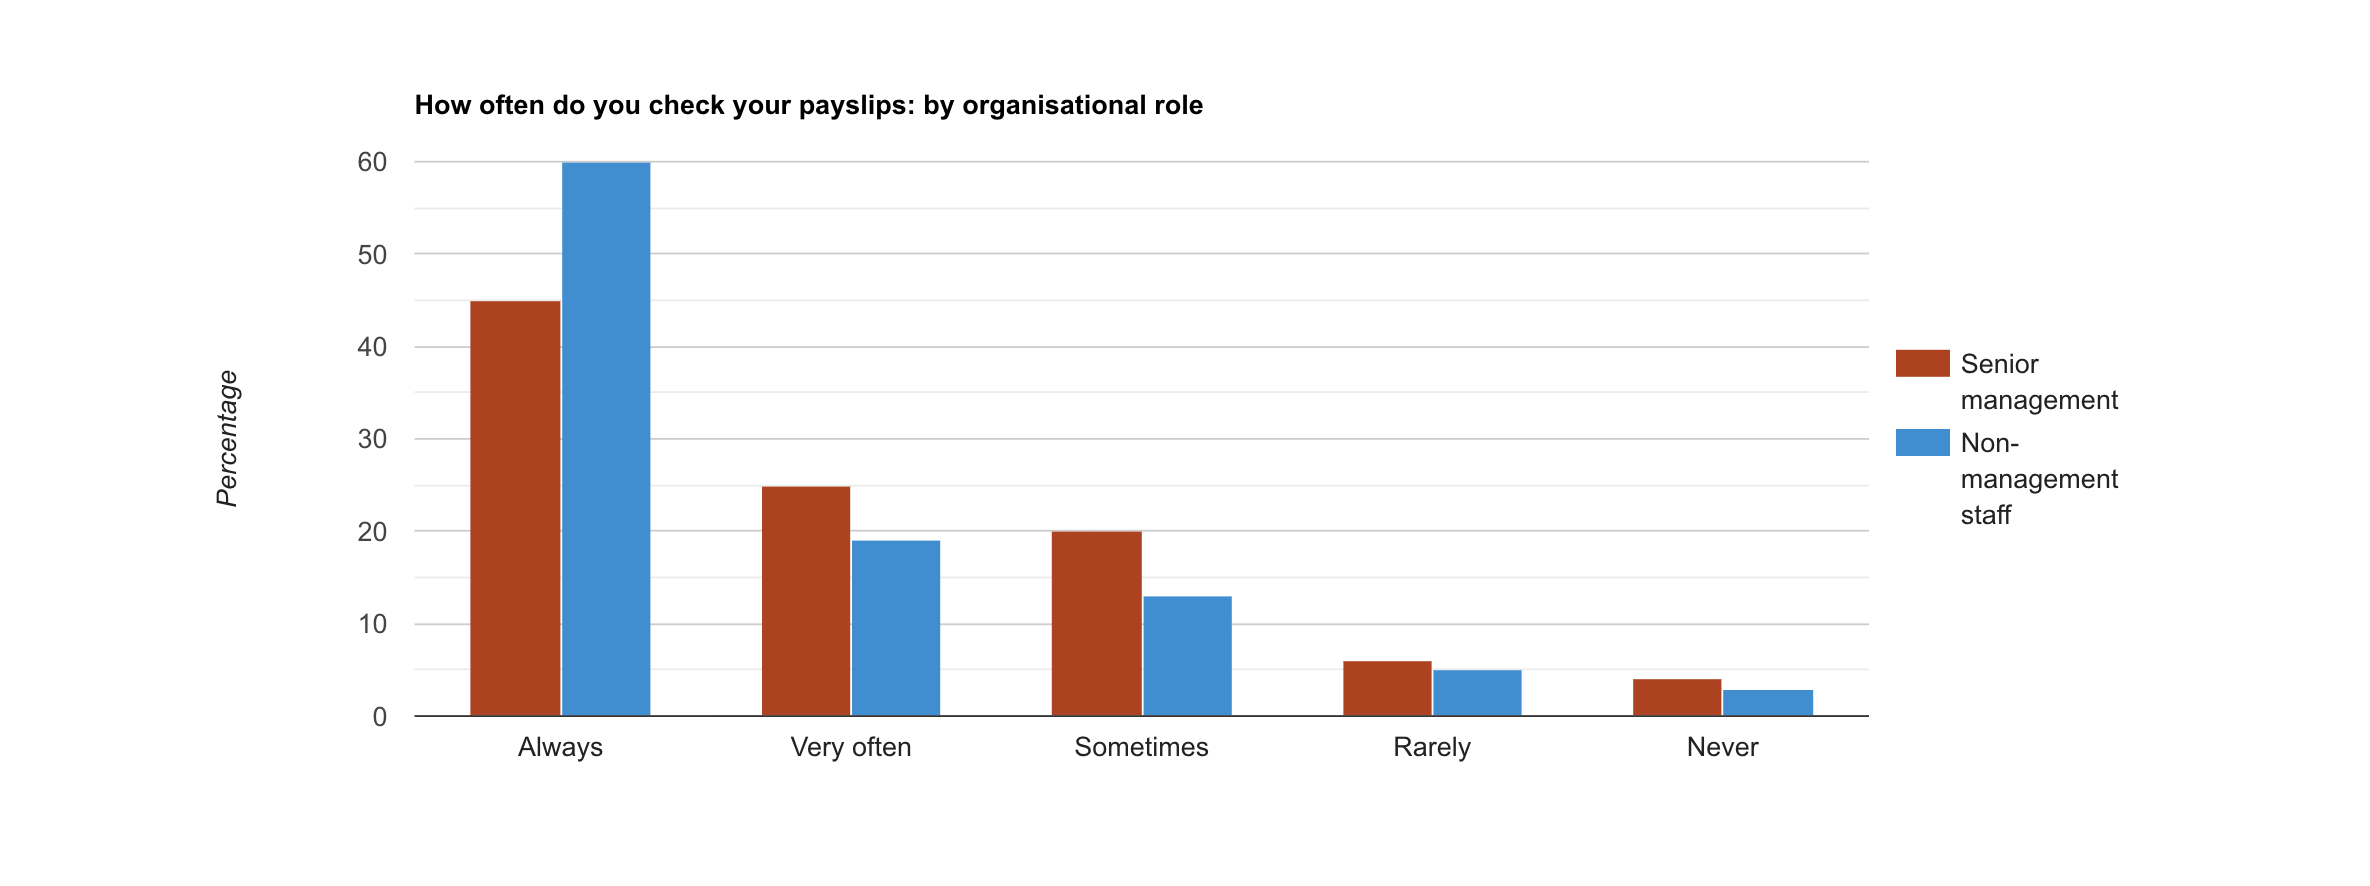 How often do you check your payslips? - by job role